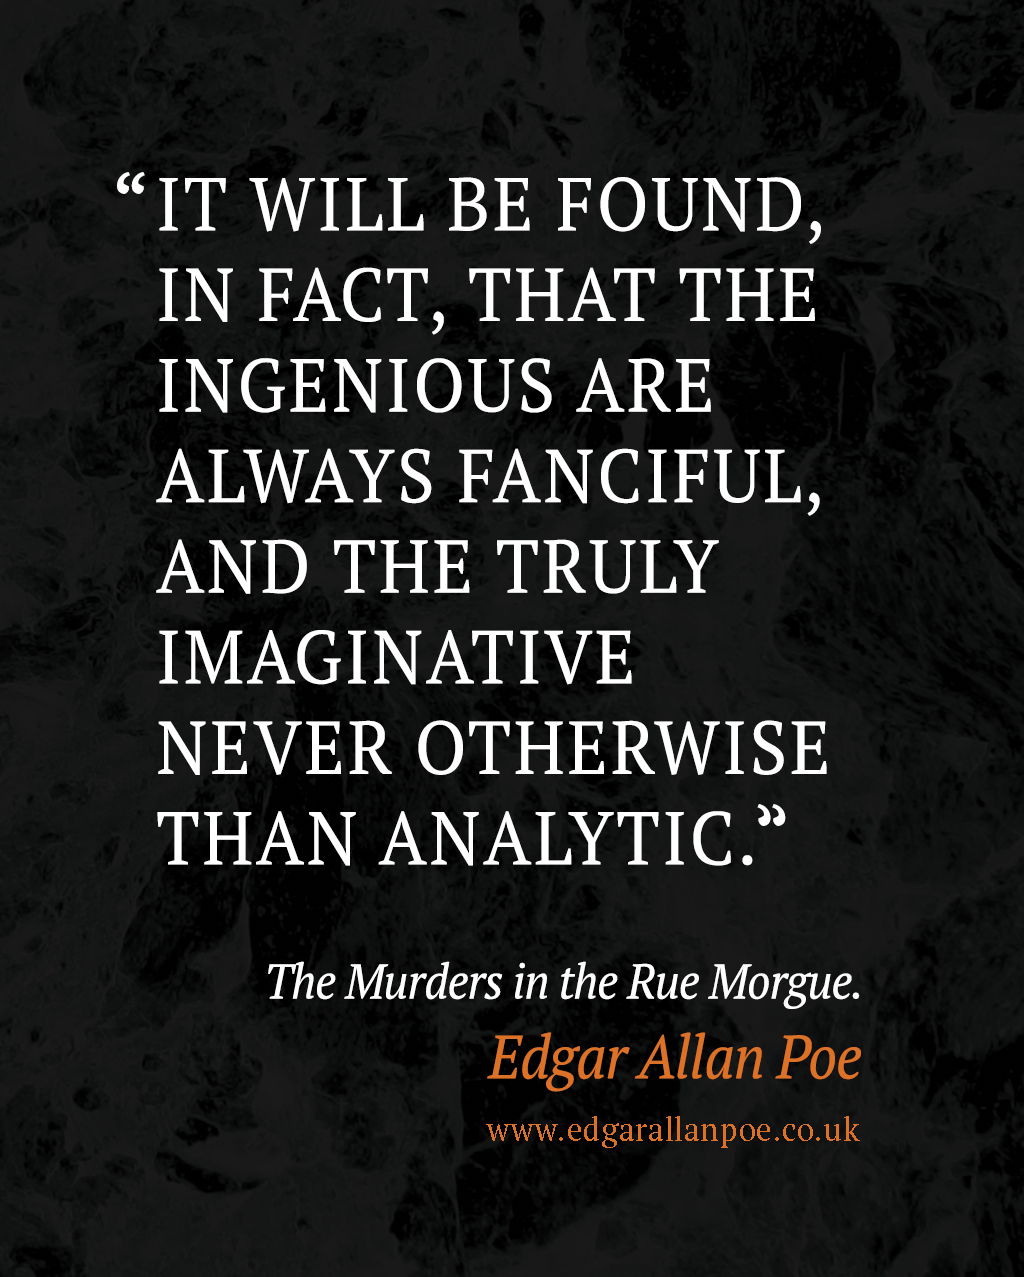 "It will be found, in fact, that the ingenious are always fanciful, and the truly imaginative never otherwise than analytic." ― Edgar Allan Poe, The Murders in the Rue Morgue